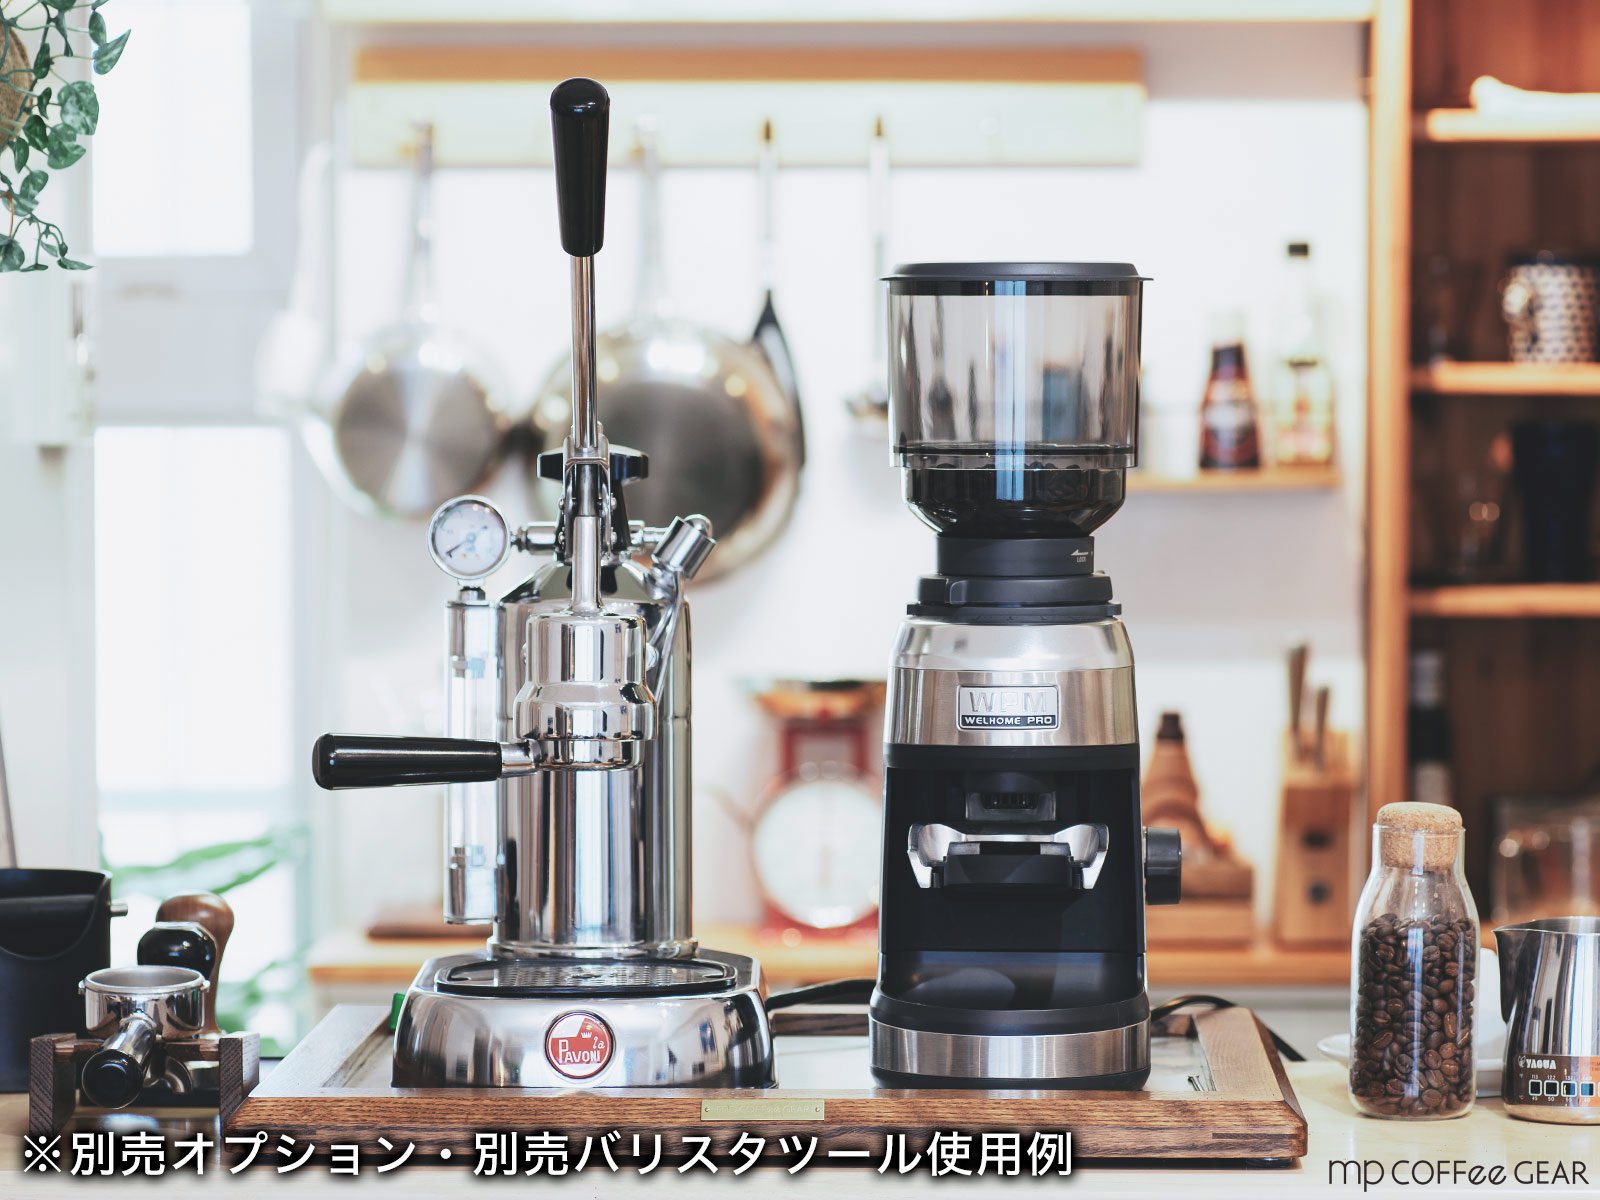 mp coffee gear la Pavoni （ラ・パヴォーニ）エスプレッソマシン ”PROFESSIONAL” PL<img class='new_mark_img2' src='https://img.shop-pro.jp/img/new/icons16.gif' style='border:none;display:inline;margin:0px;padding:0px;width:auto;' />